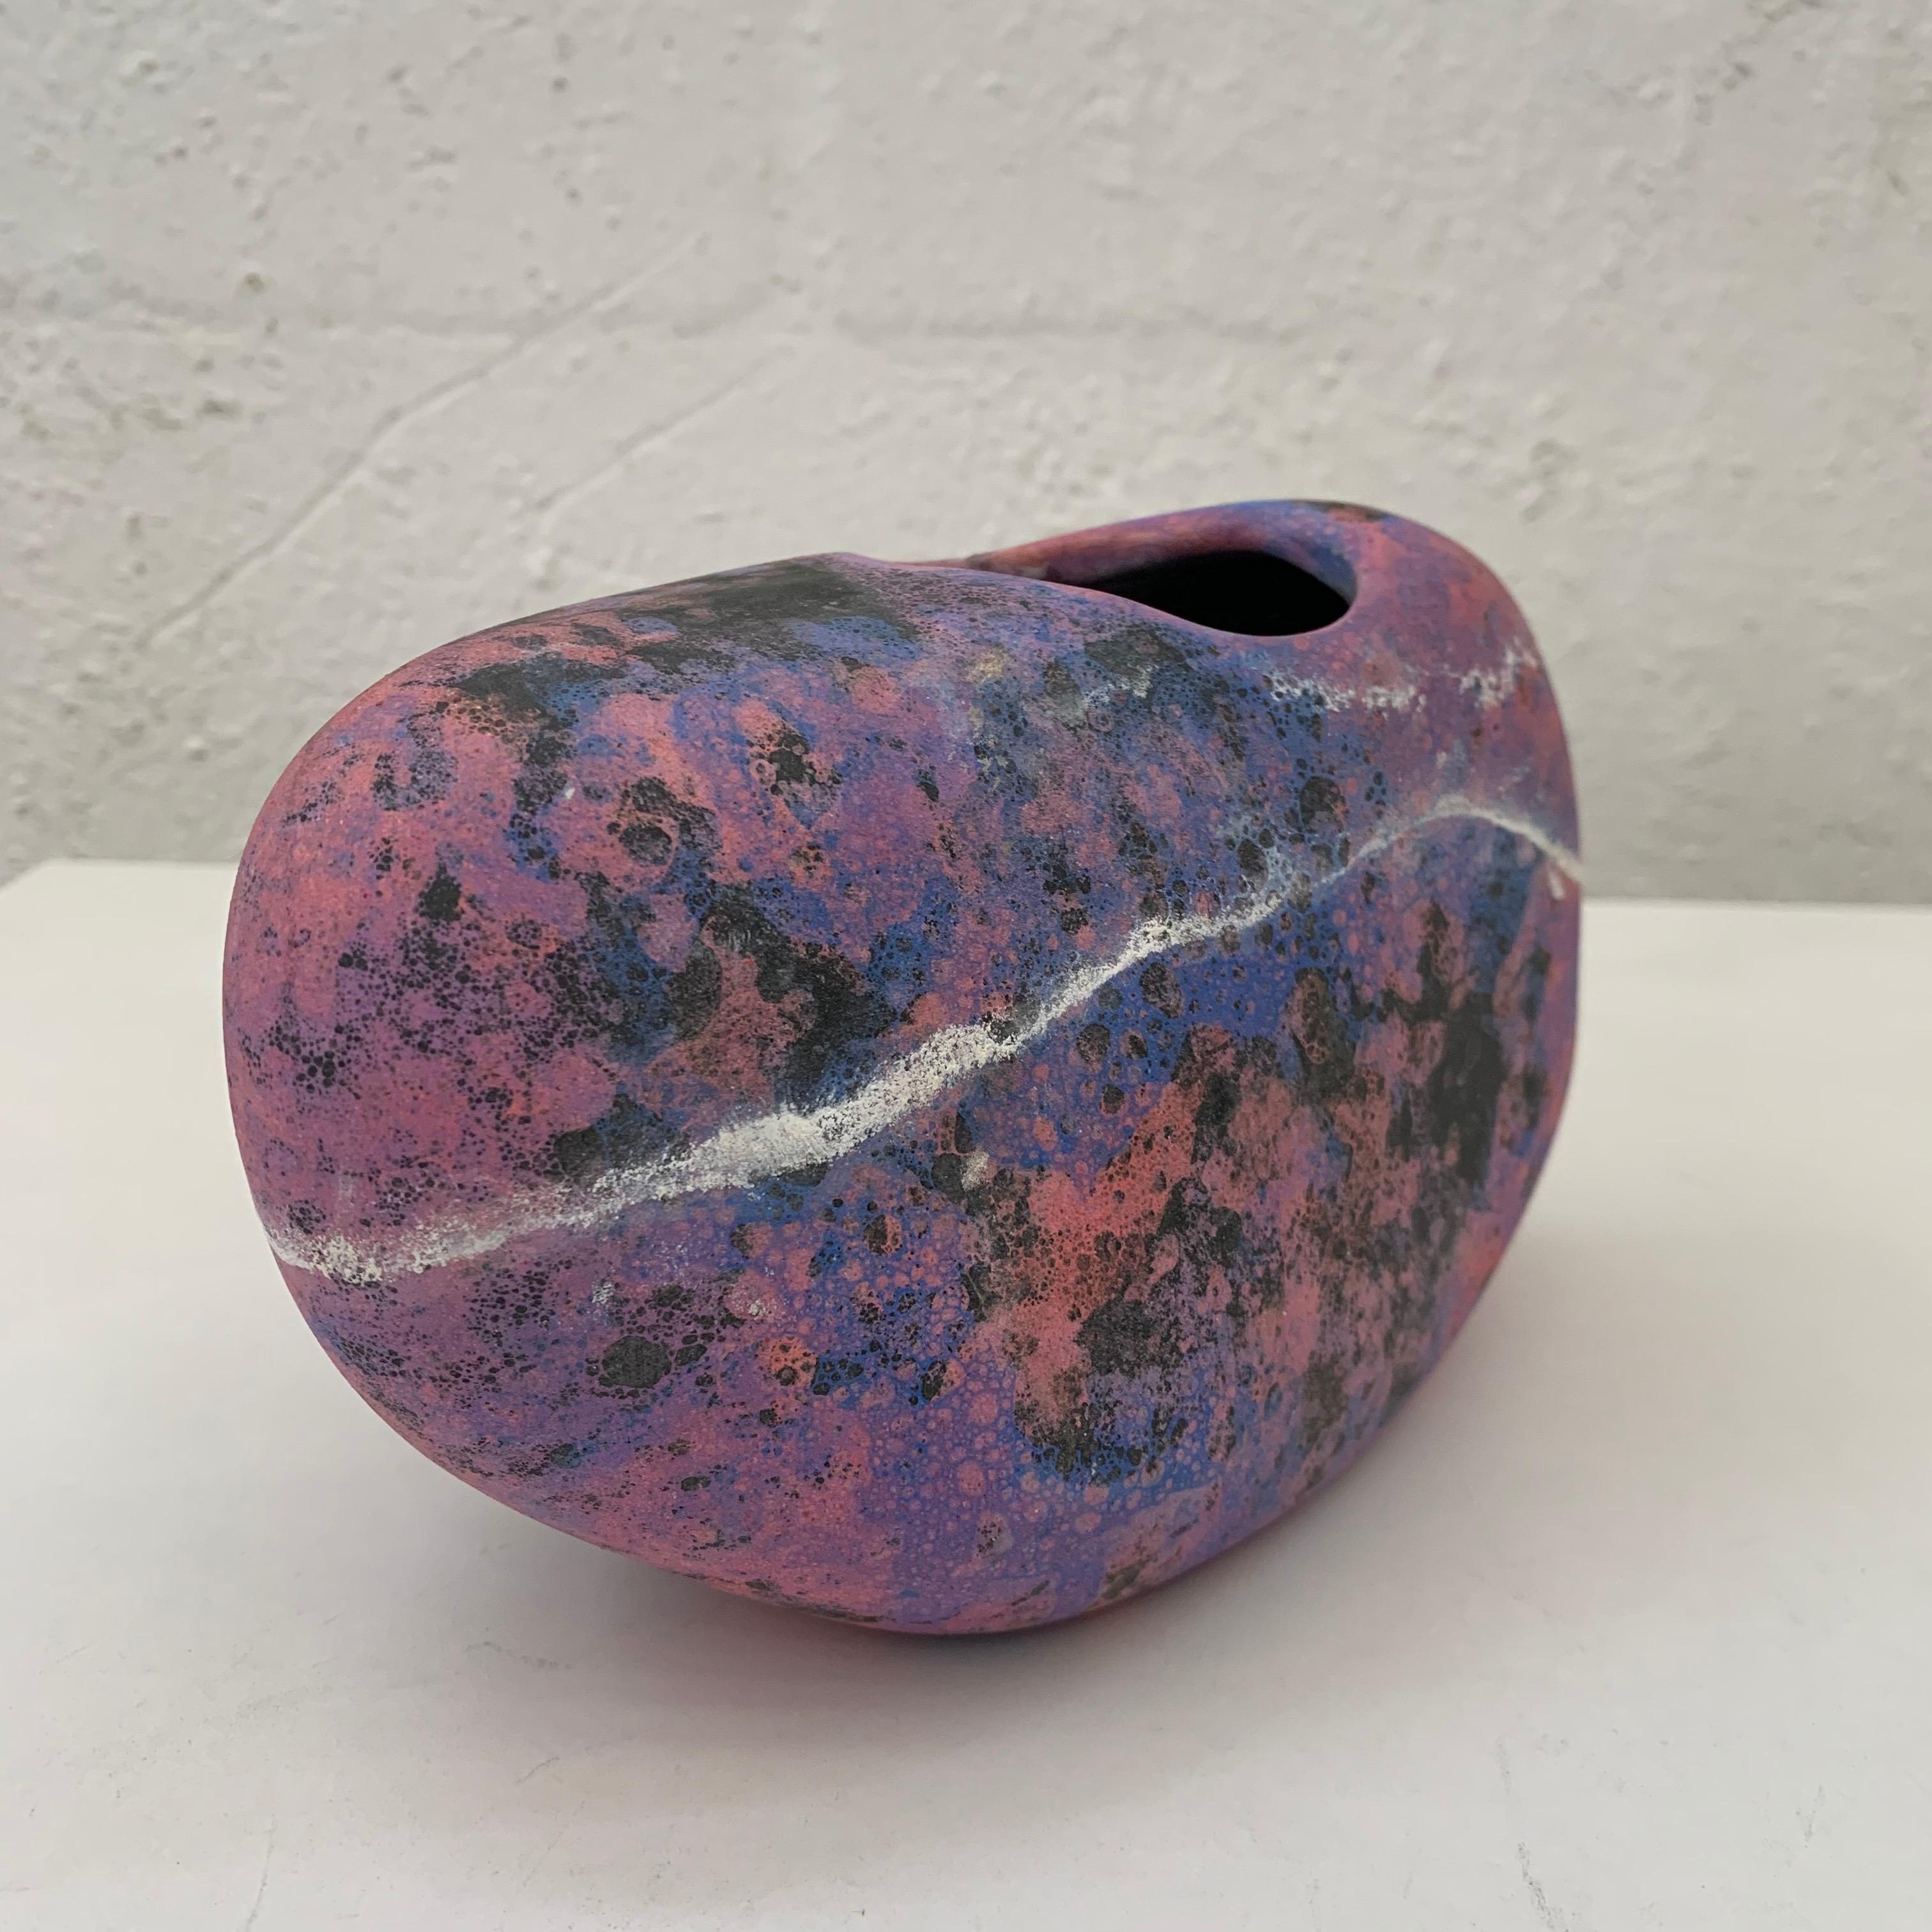 Sculptural amorphic vase rendered in thin walled pottery with glazes of black purple magenta pink blue and white in an celestial style, handmade, USA.